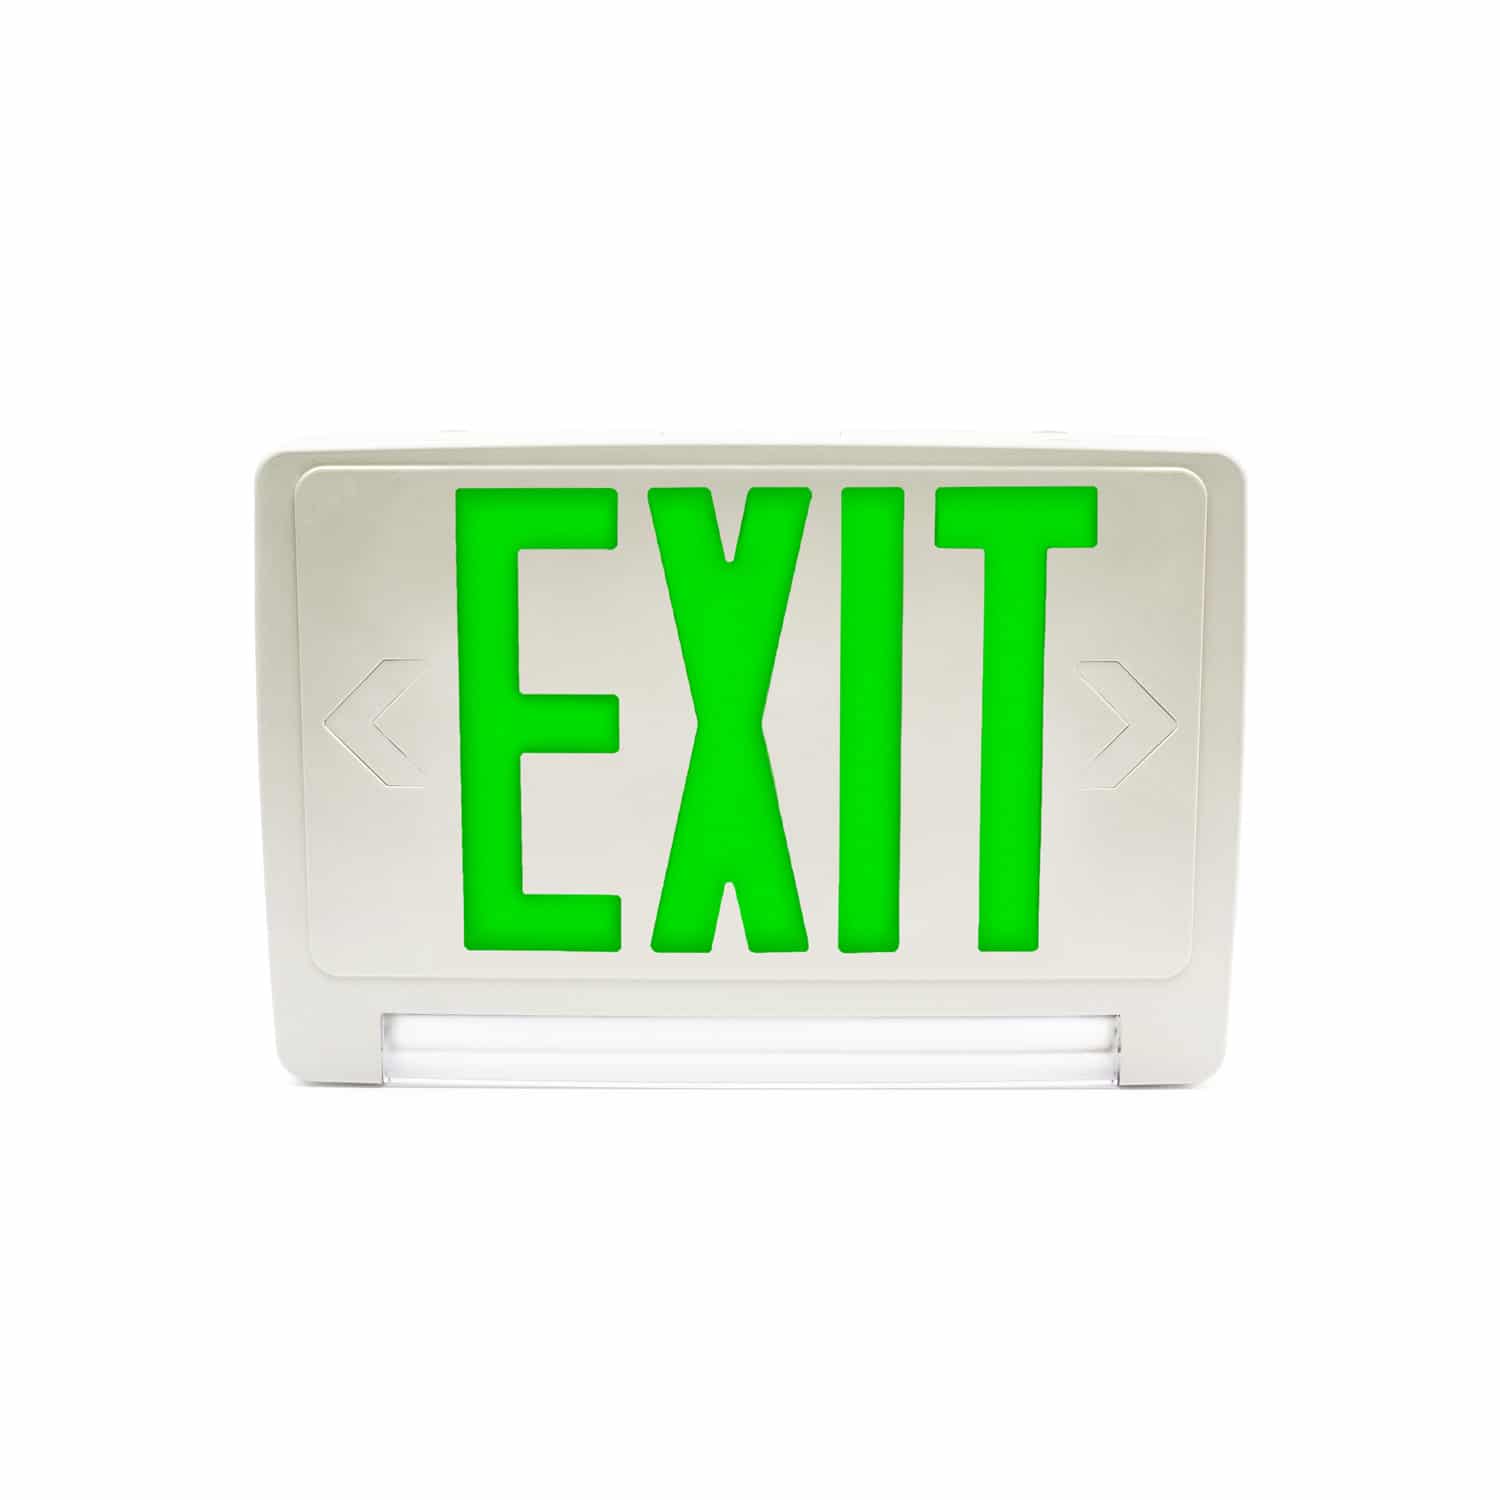 Damp Location Exit Sign And Emergency